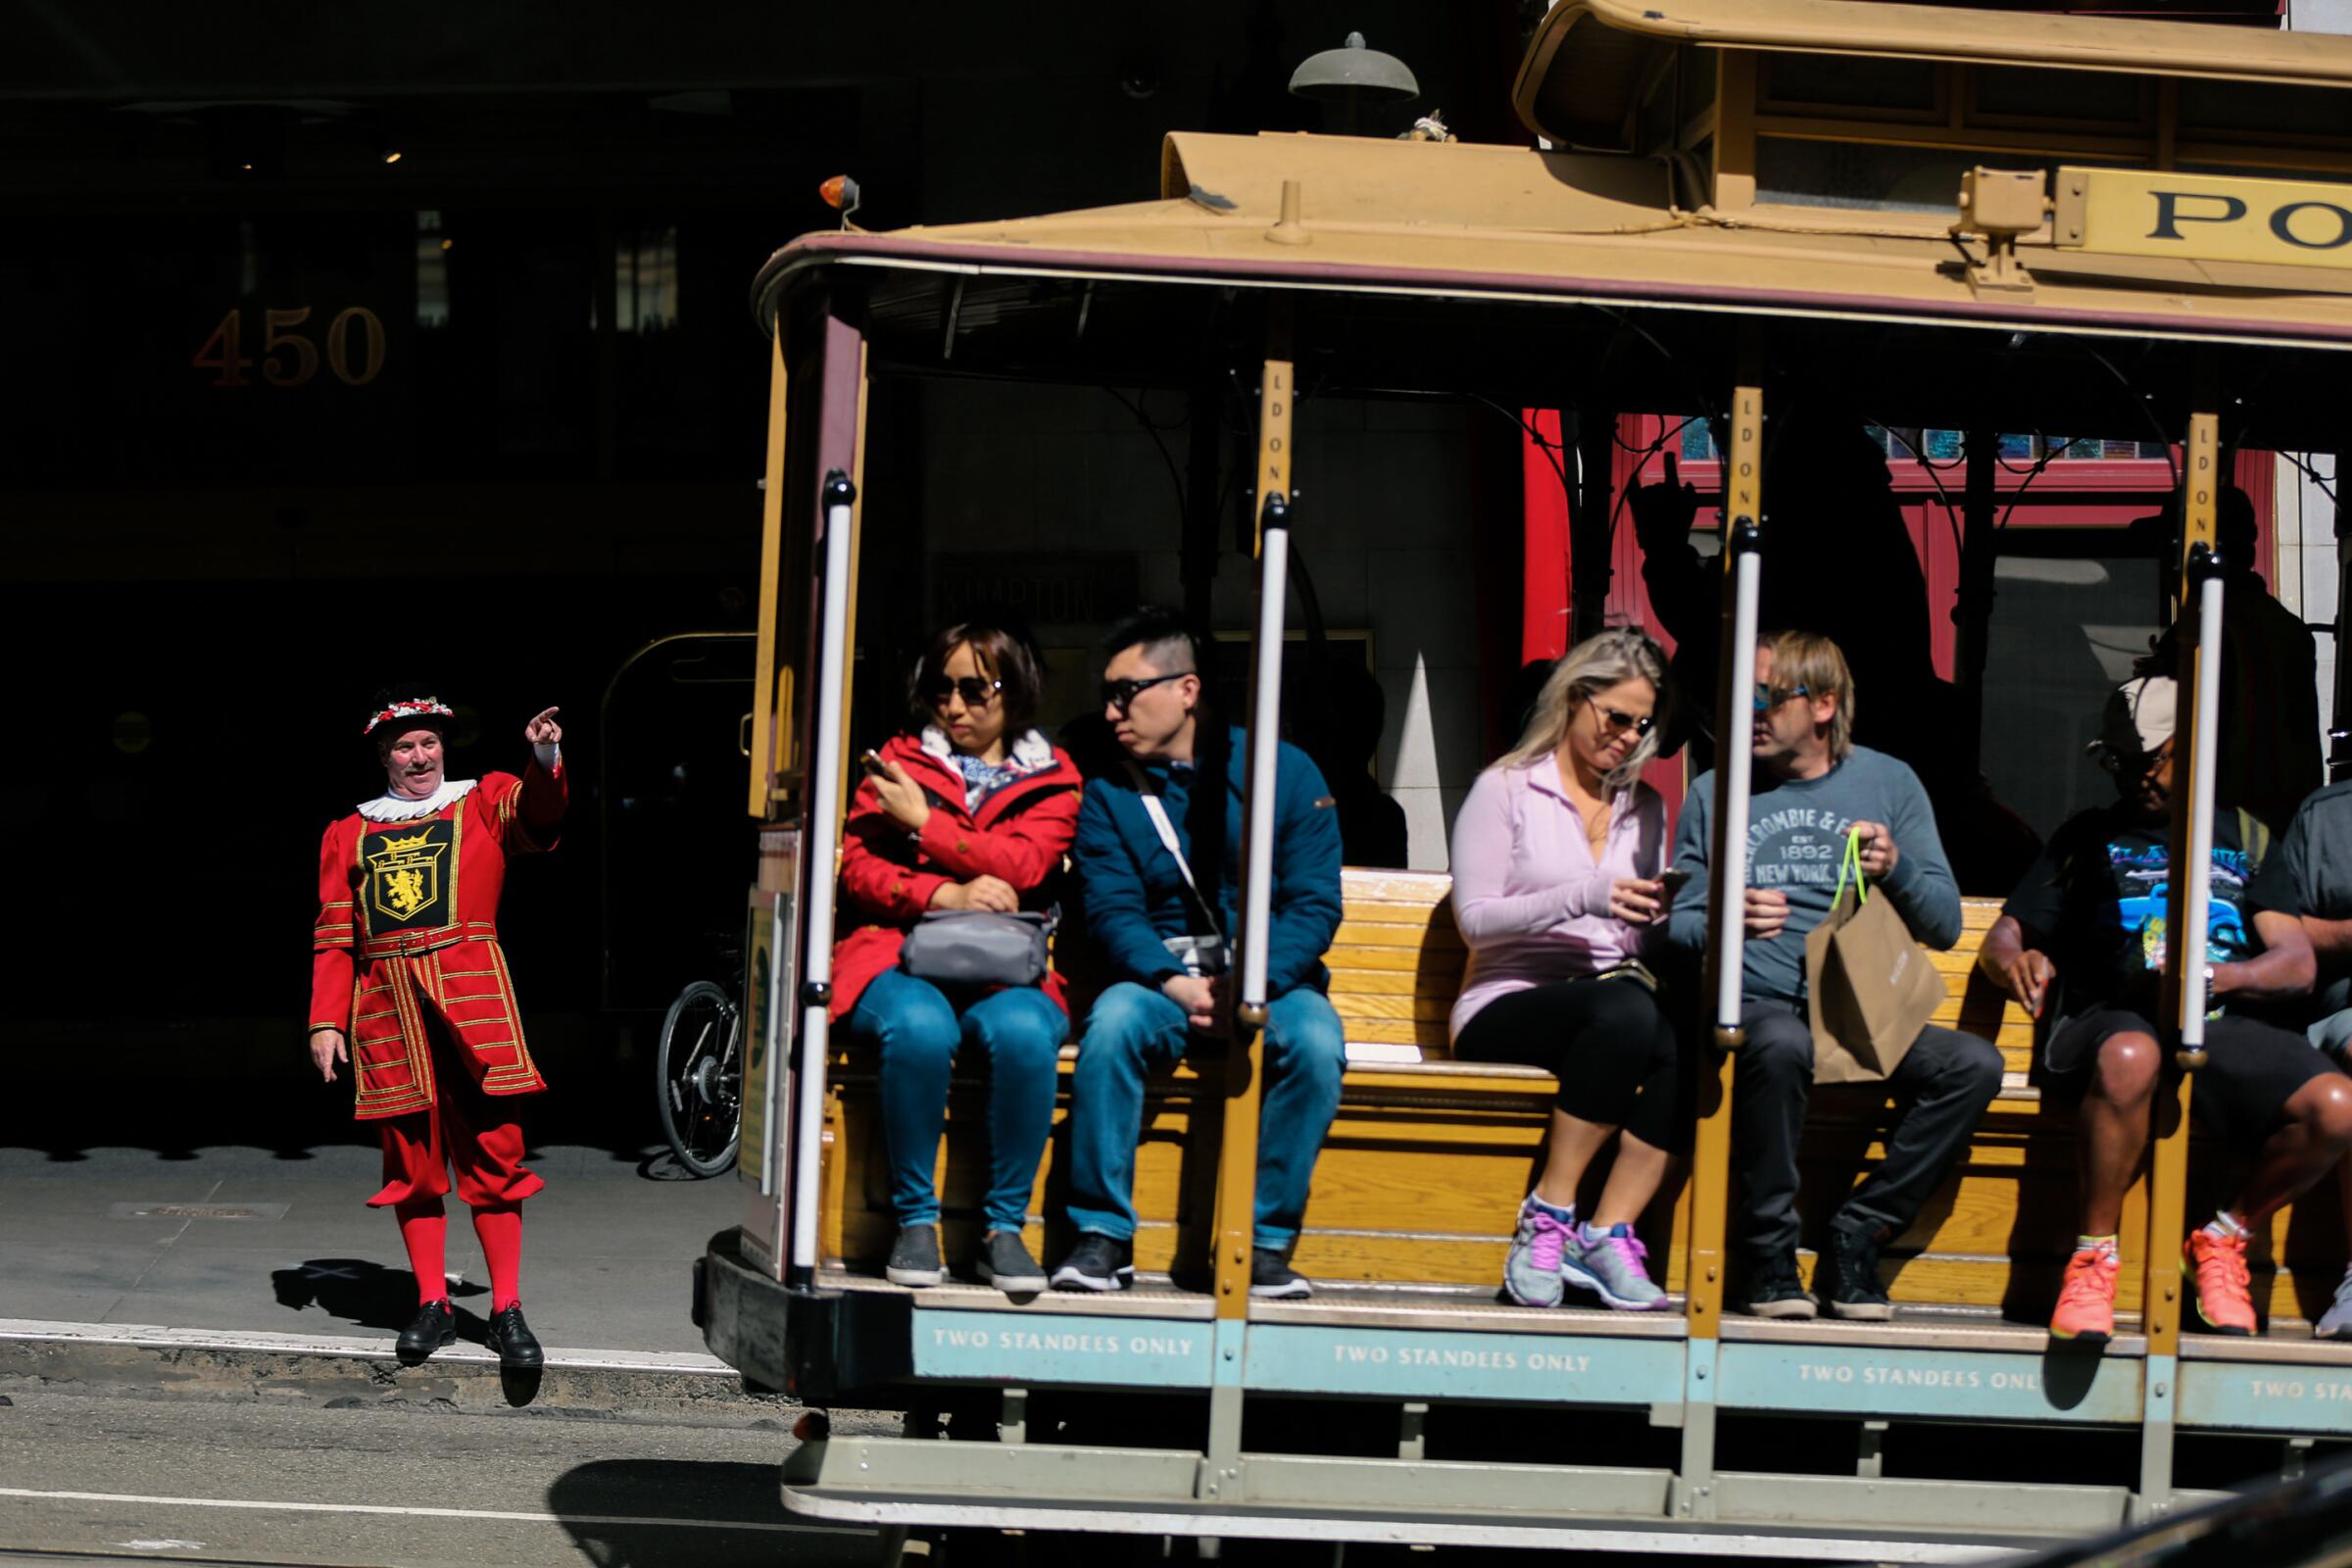 A Sir Francis Drake hotel doorman dressed in traditional beefeater garb points at a passing cable car.